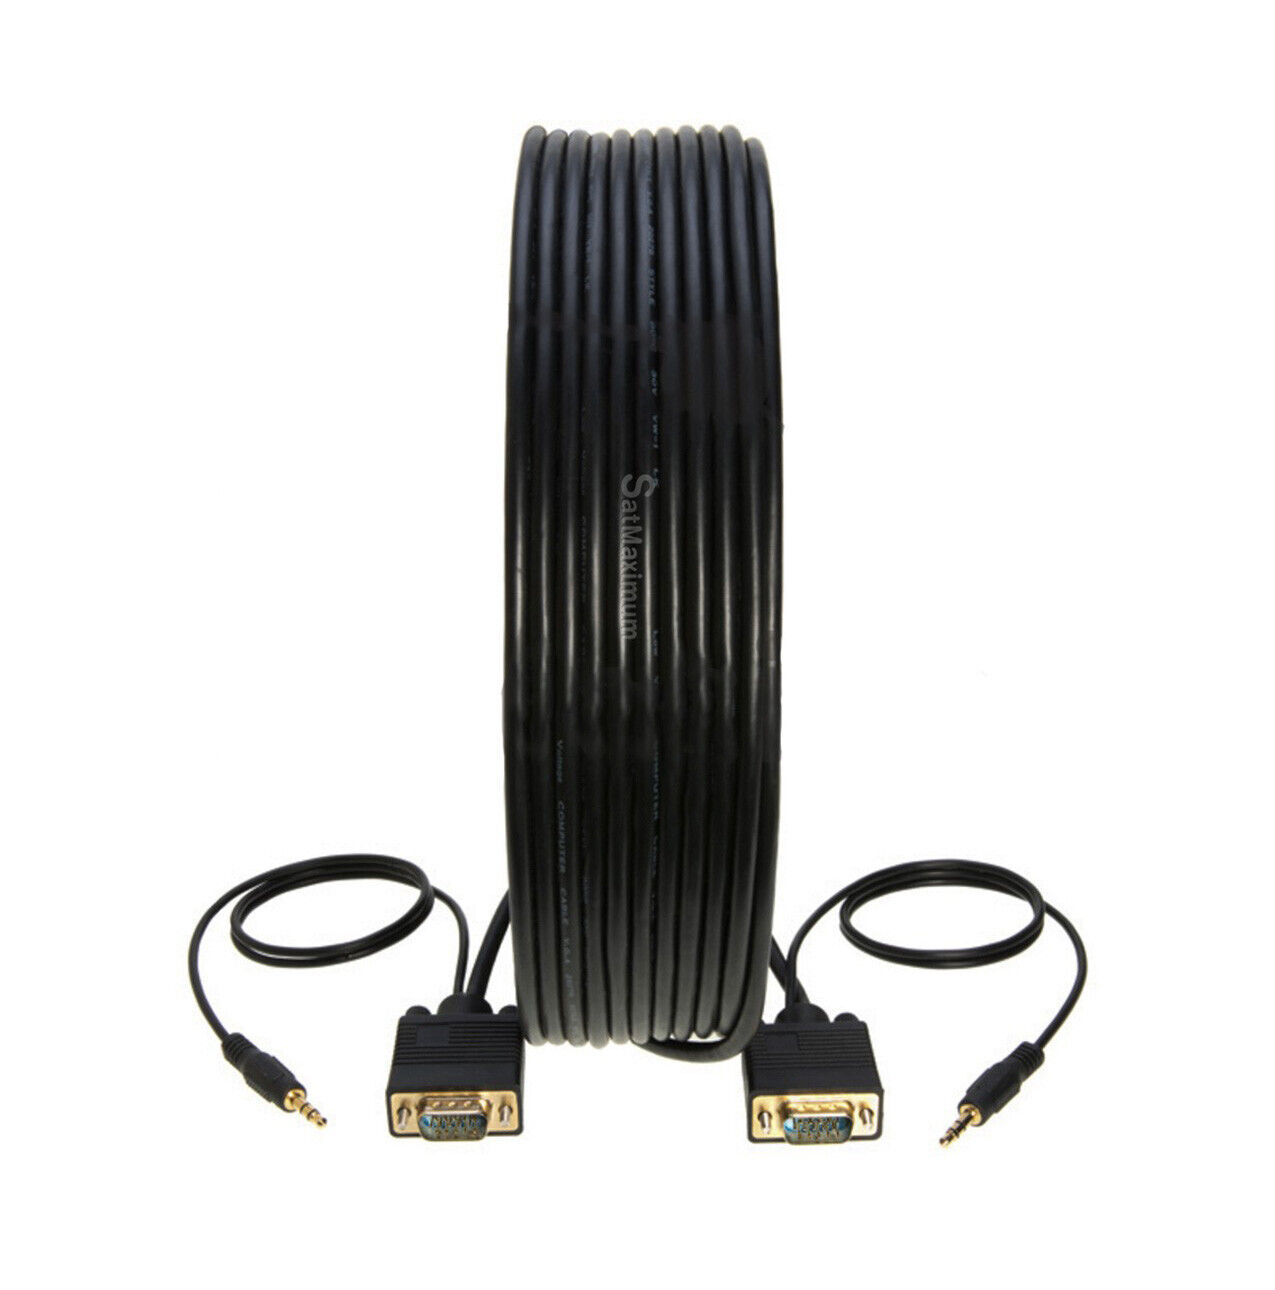 50FT VGA/SVGA 15 PIN M/M Cable With 3.5MM AUDIO Cord For Monitor HDTV Video